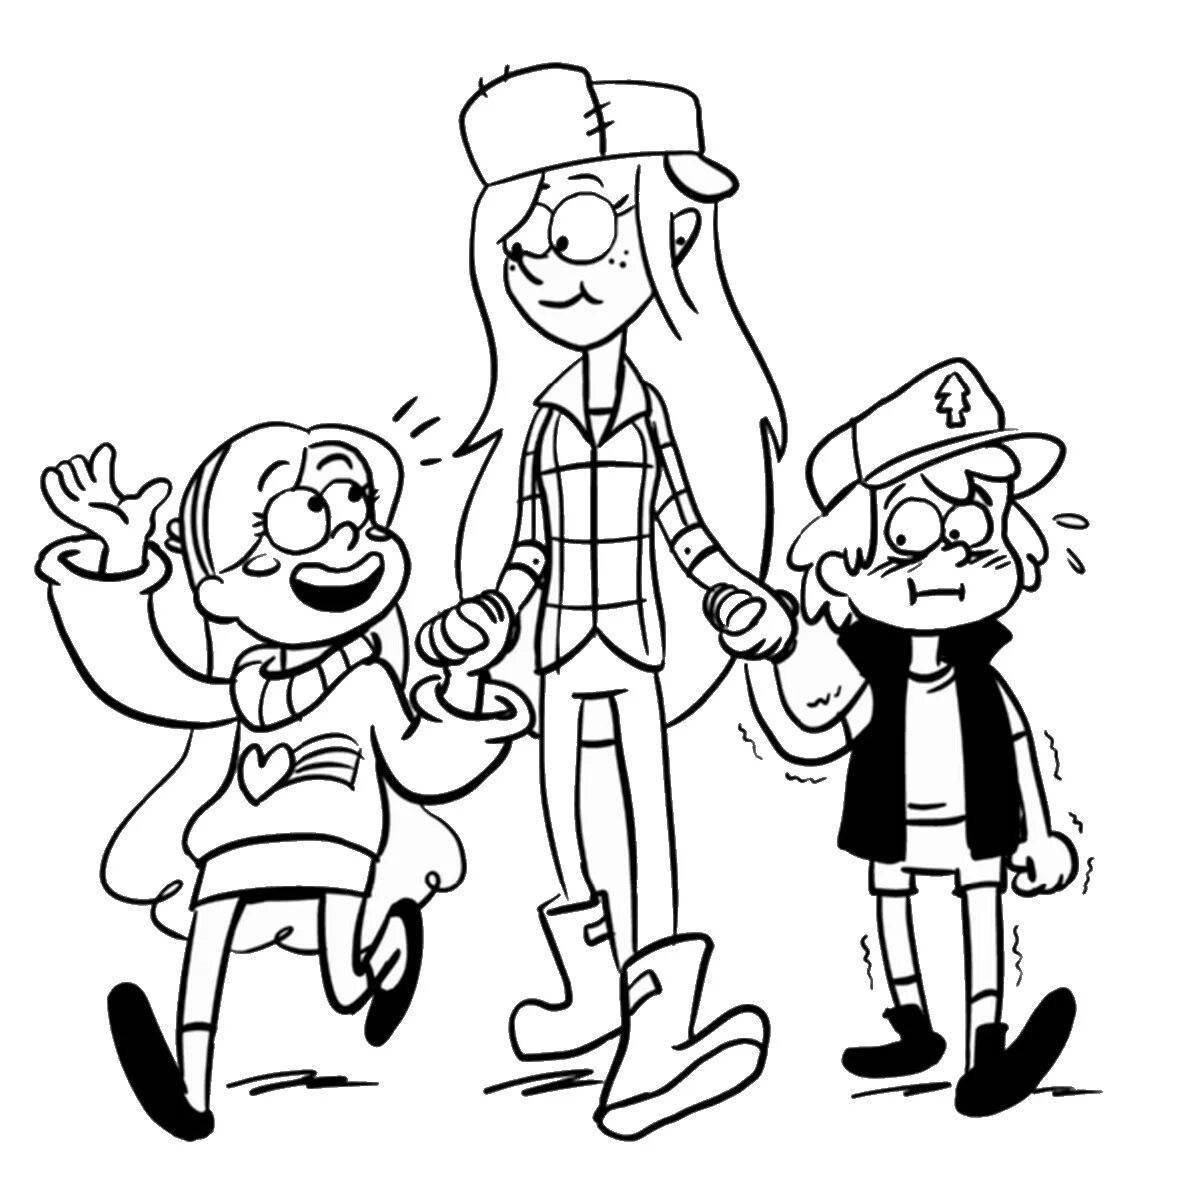 Gravity falls glittering dipper coloring page